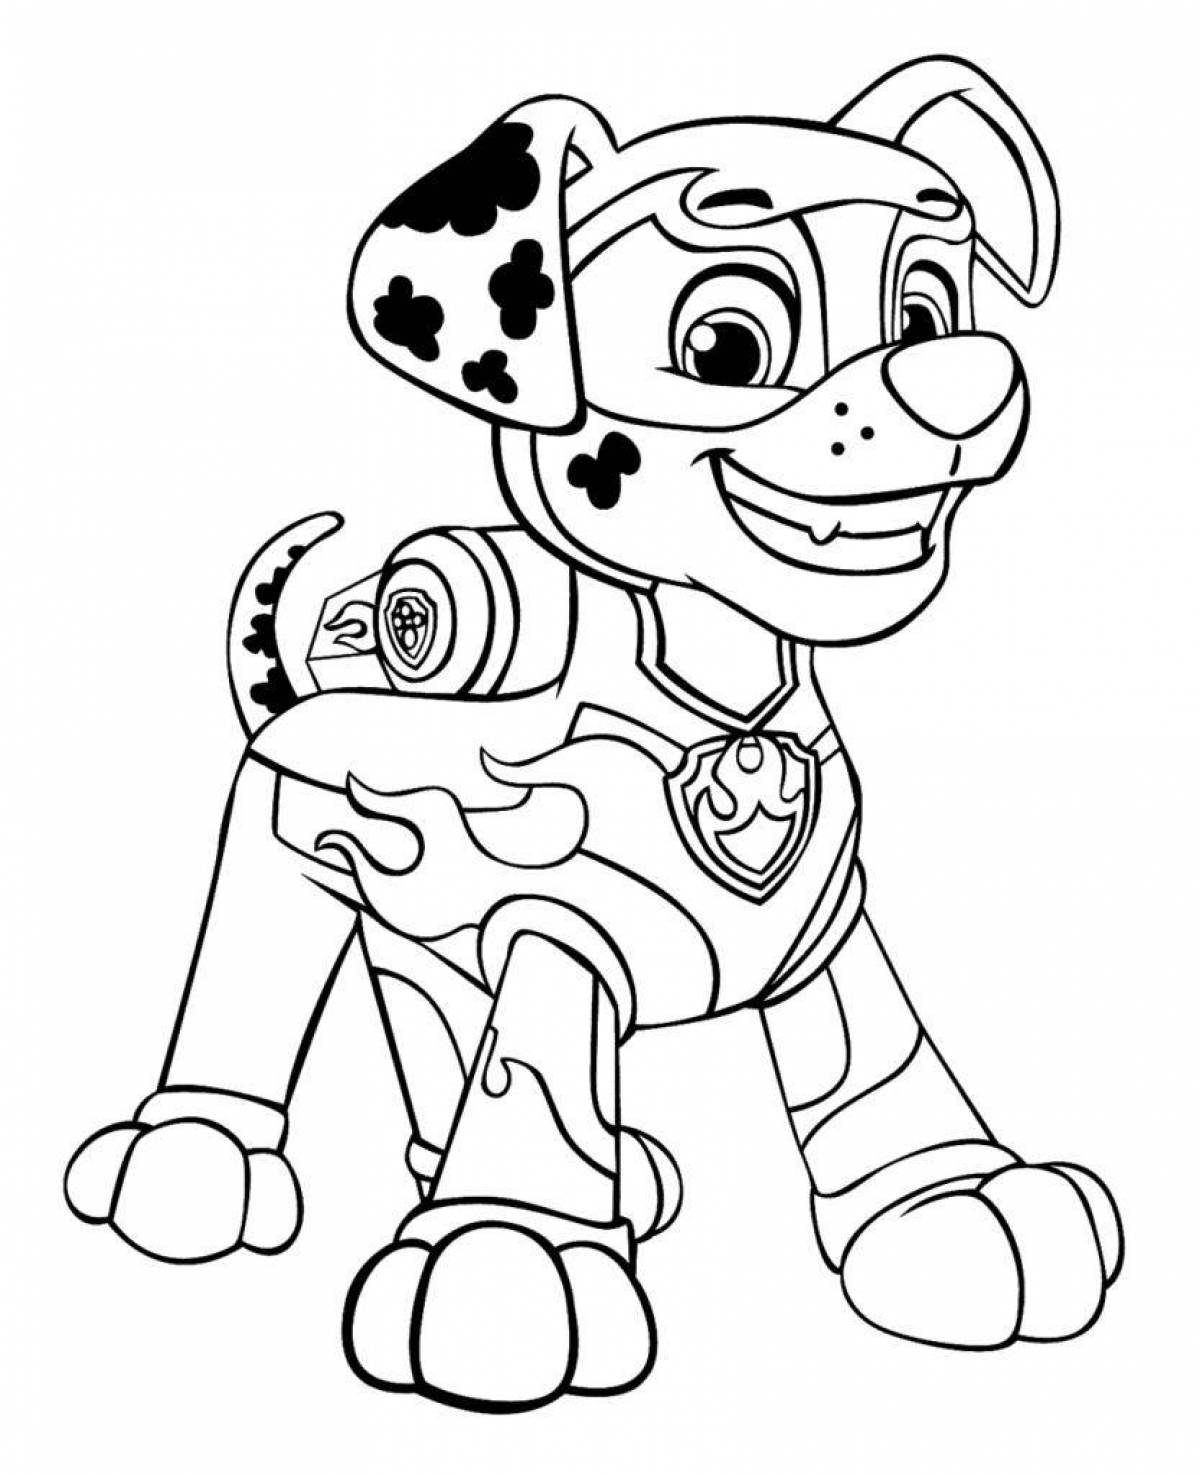 Majestic mega racer coloring page